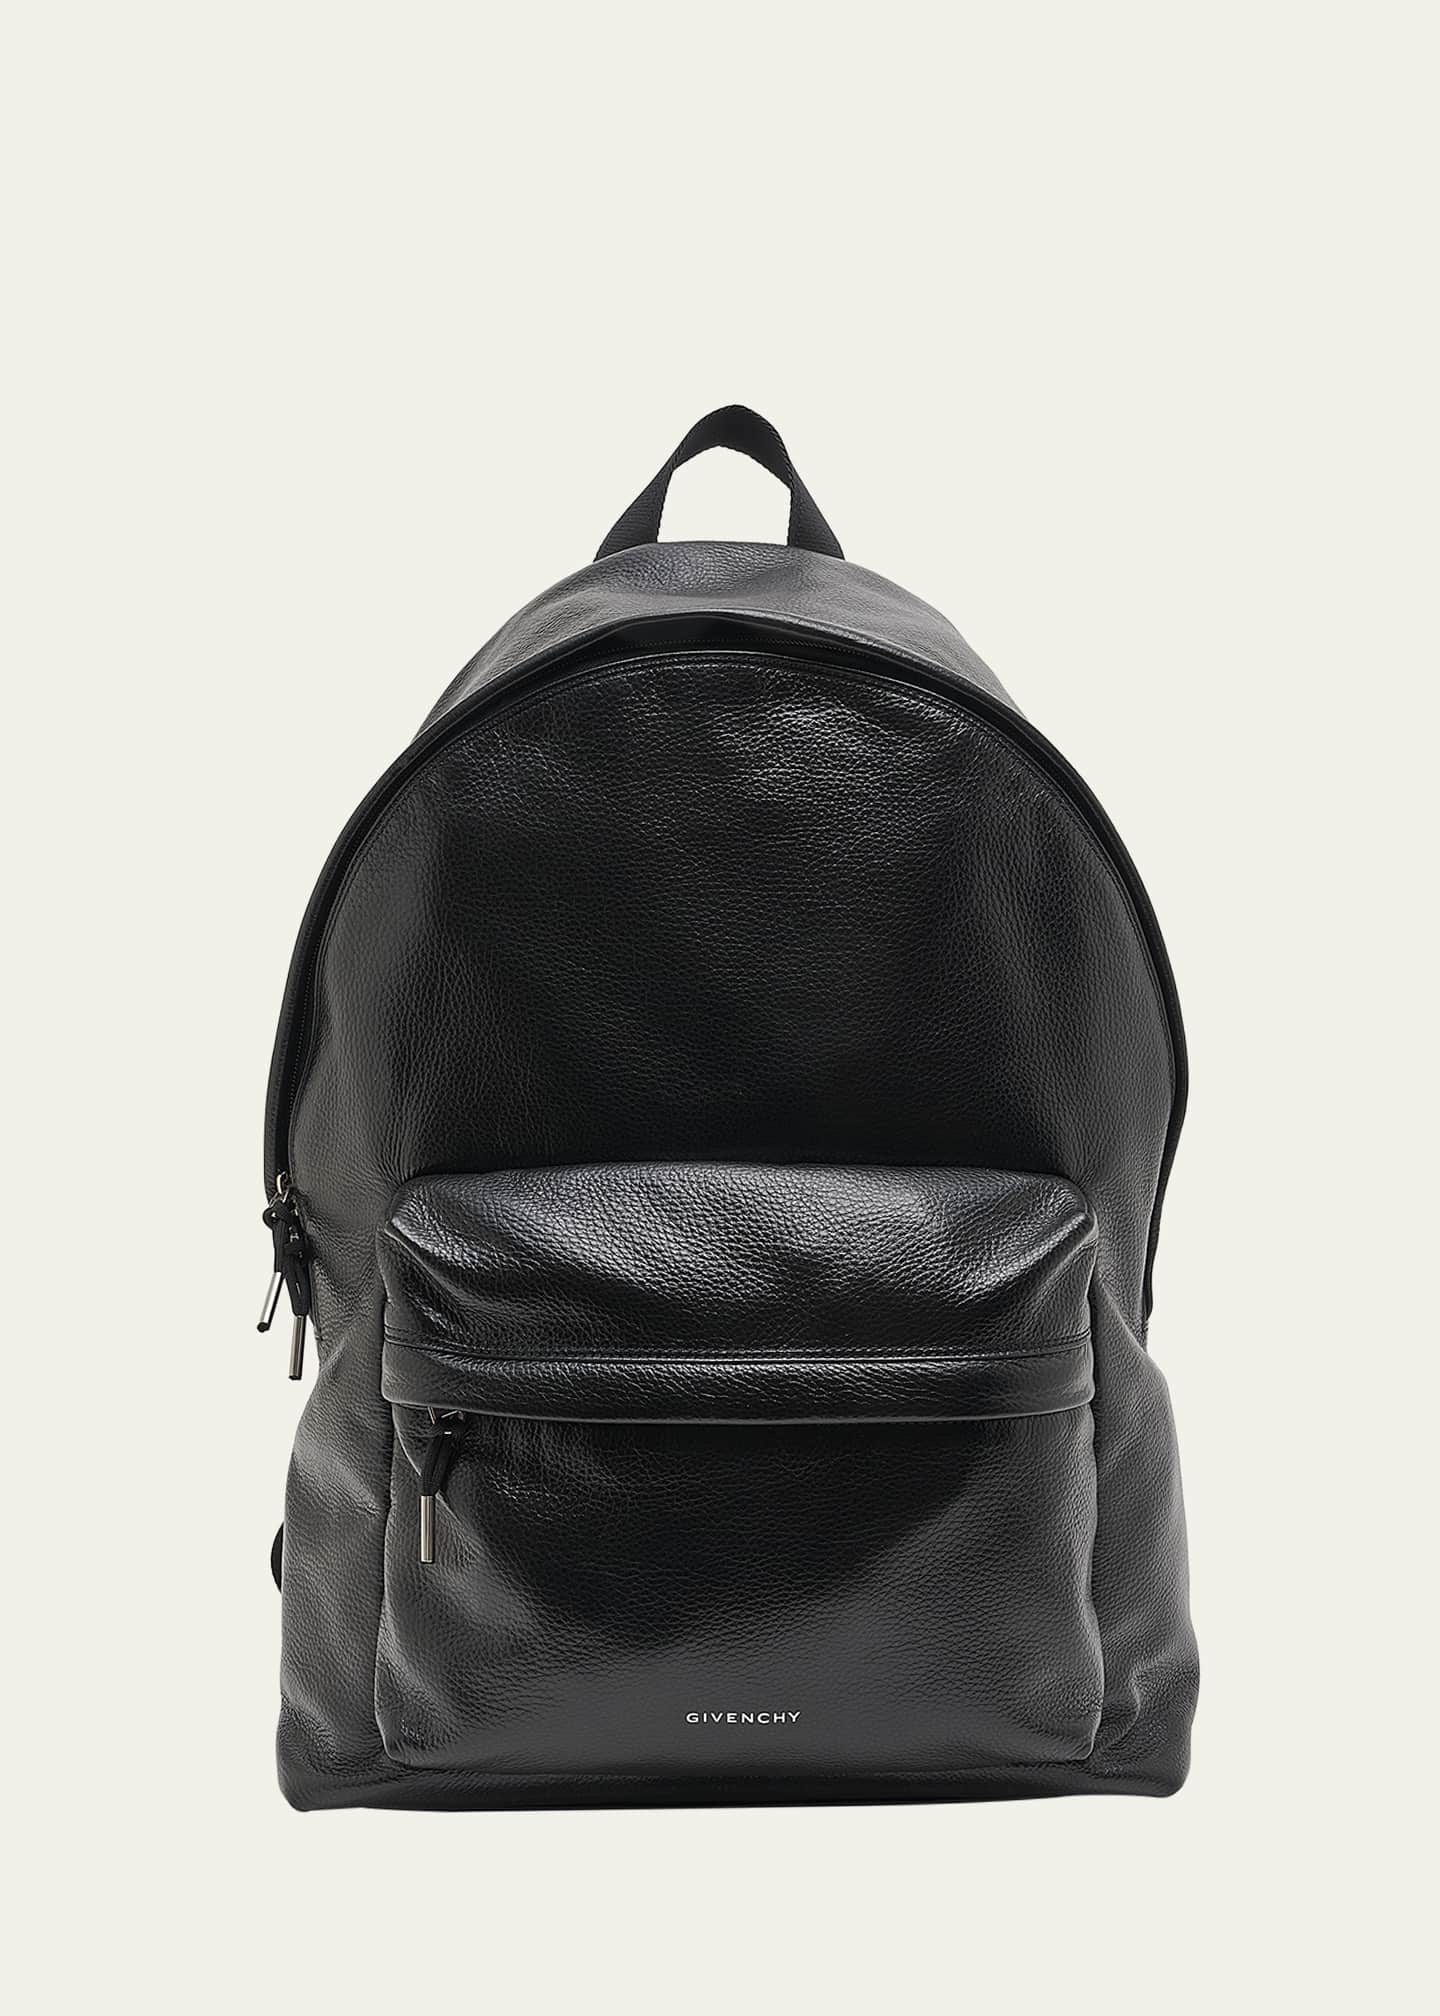 Givenchy Men's Essential U XL Leather Backpack